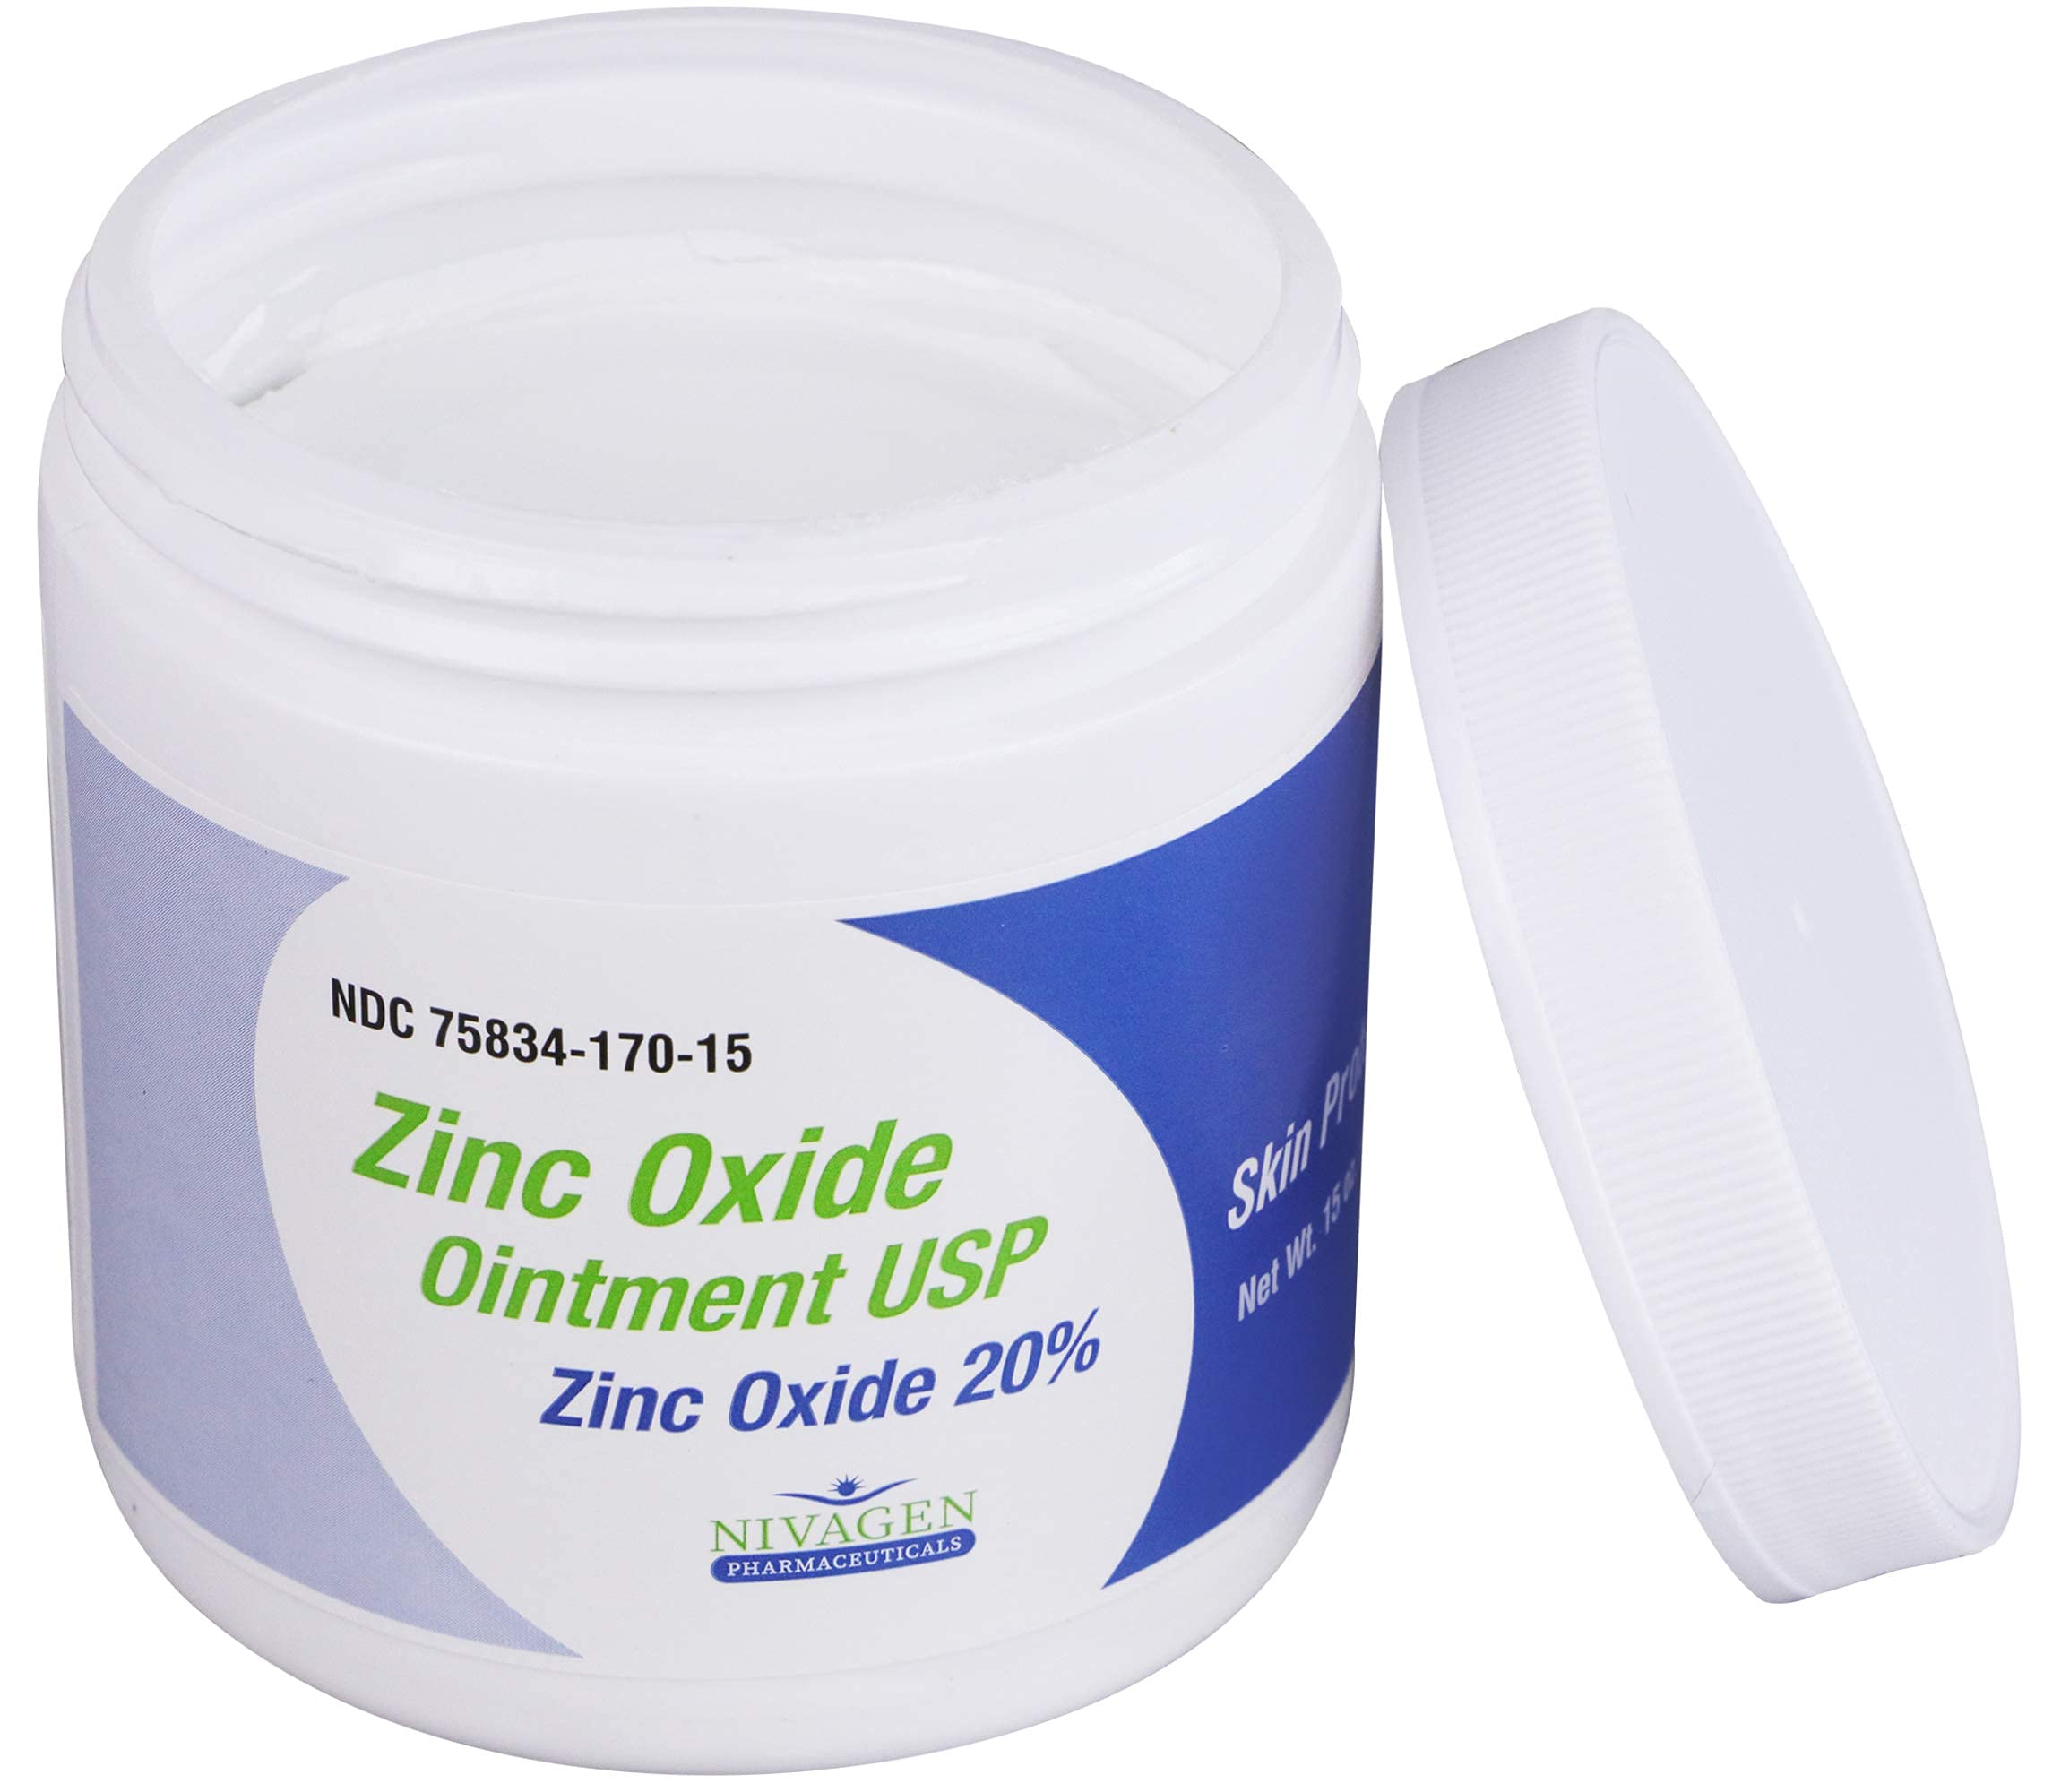 Nivagen Zinc Oxide Ointment USP 20% | For Diaper Rash, Chafed Skin, Protects From Wetness, Relief From Poison Ivy, Poison Oak, & Poison Sumac | 15oz Jar Of Zinc Oxide